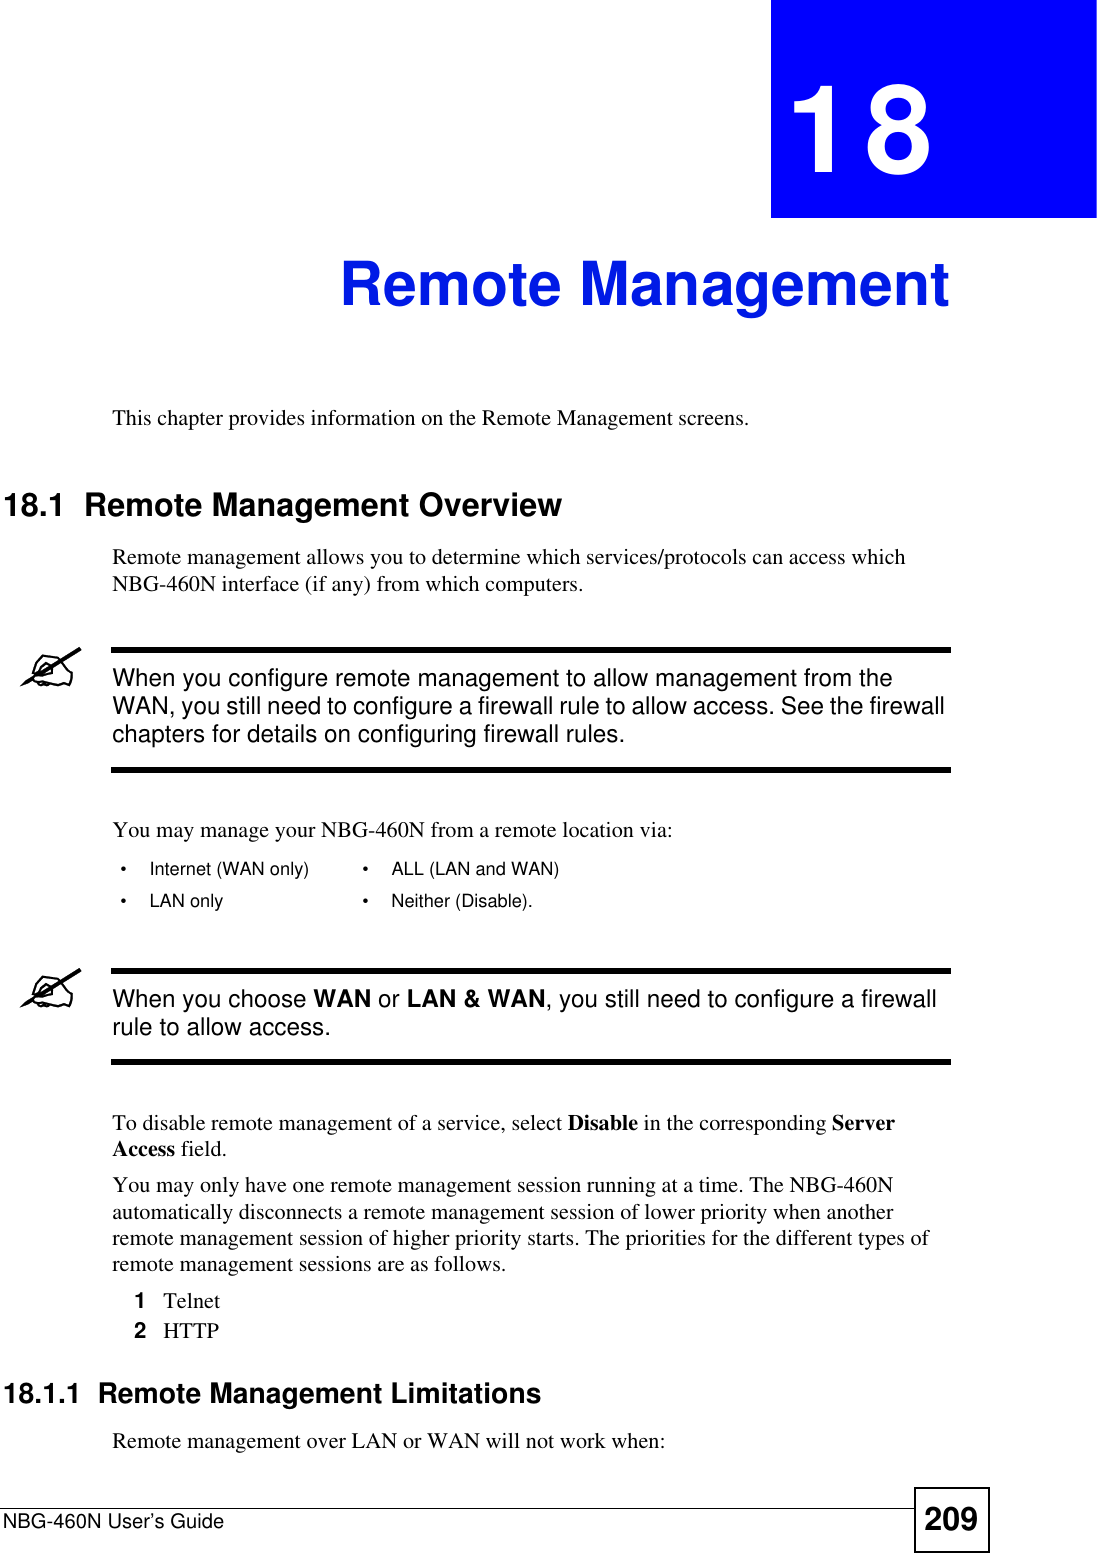 NBG-460N User’s Guide 209CHAPTER 18Remote ManagementThis chapter provides information on the Remote Management screens. 18.1  Remote Management OverviewRemote management allows you to determine which services/protocols can access which NBG-460N interface (if any) from which computers.&quot;When you configure remote management to allow management from the WAN, you still need to configure a firewall rule to allow access. See the firewall chapters for details on configuring firewall rules.You may manage your NBG-460N from a remote location via:&quot;When you choose WAN or LAN &amp; WAN, you still need to configure a firewall rule to allow access.To disable remote management of a service, select Disable in the corresponding ServerAccess field.You may only have one remote management session running at a time. The NBG-460N automatically disconnects a remote management session of lower priority when another remote management session of higher priority starts. The priorities for the different types of remote management sessions are as follows.1Telnet2HTTP18.1.1  Remote Management LimitationsRemote management over LAN or WAN will not work when:• Internet (WAN only) • ALL (LAN and WAN)• LAN only • Neither (Disable).